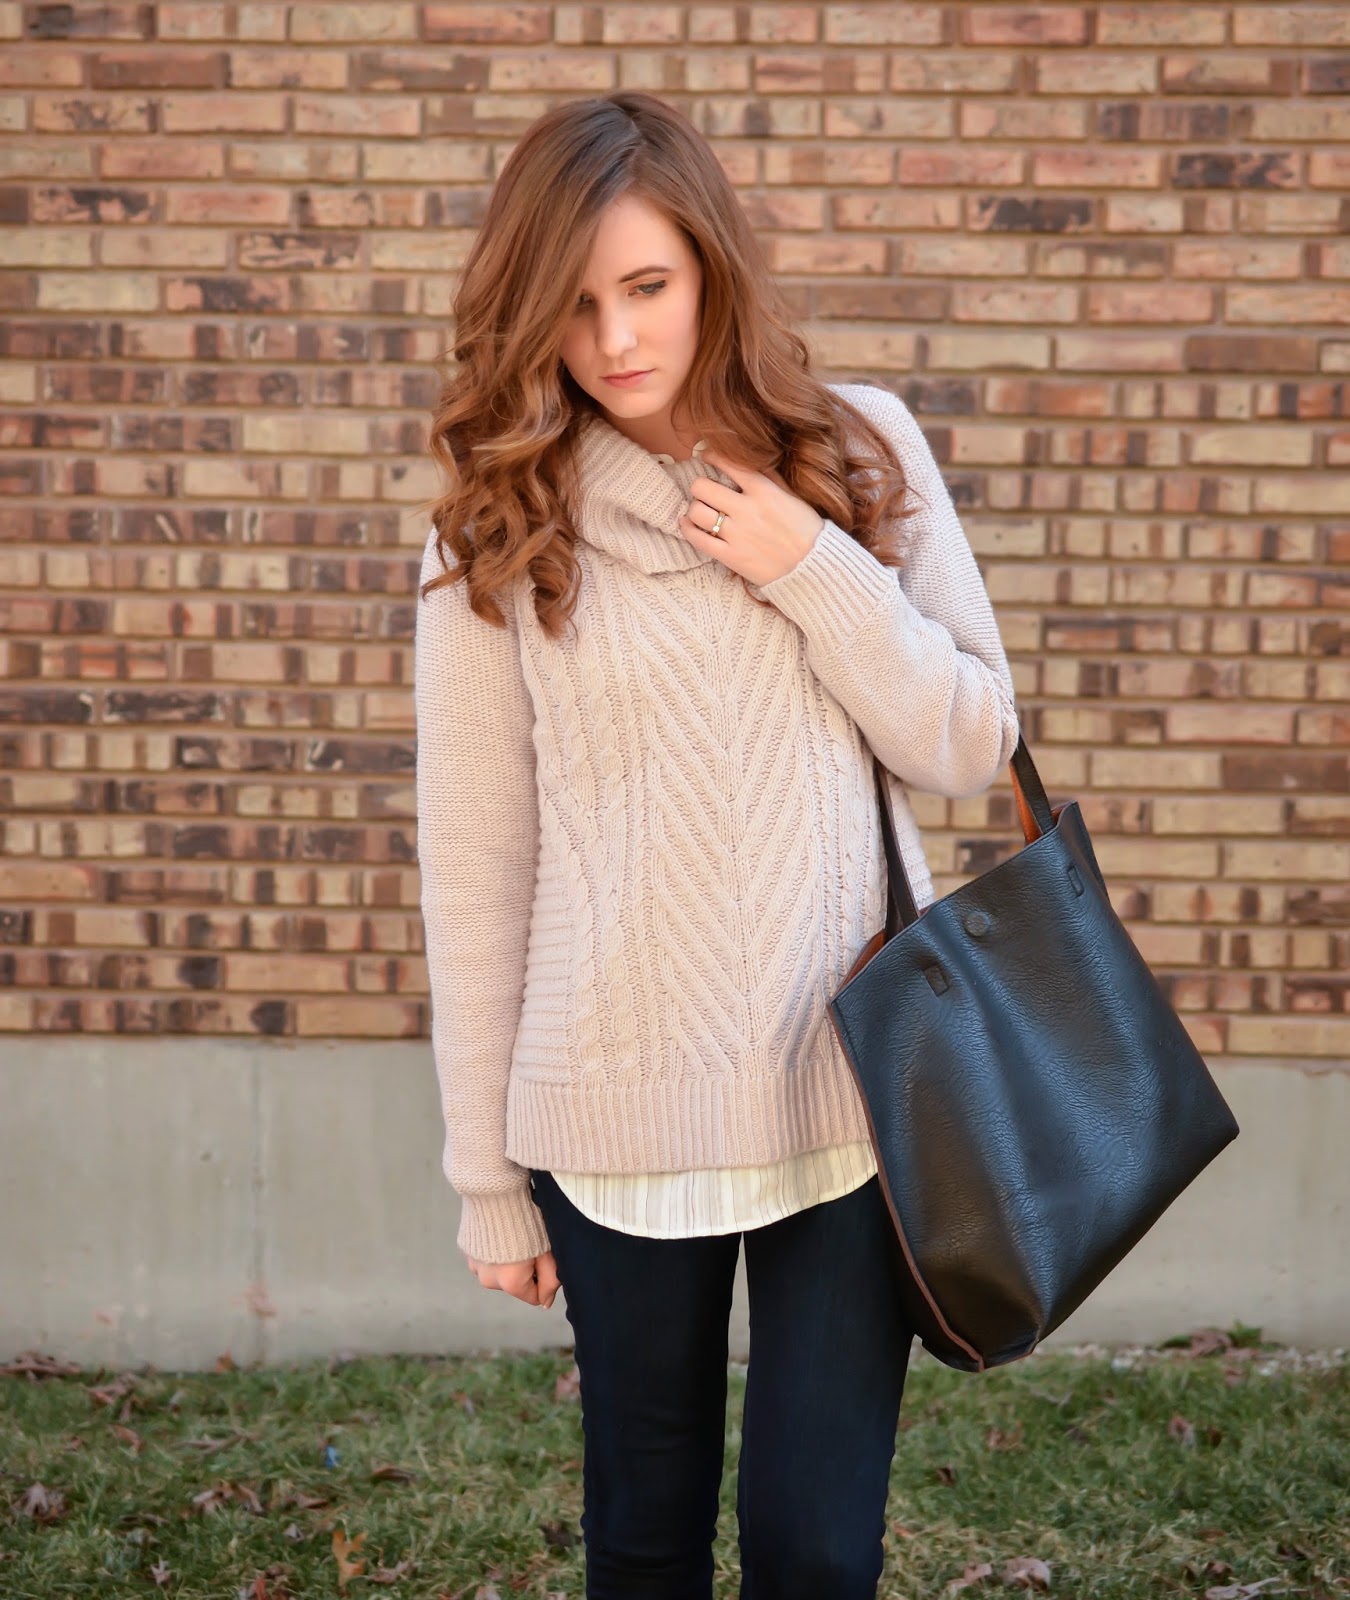 Sincerely Jenna Marie | A St. Louis Life and Style Blog: Chunky Knits ...